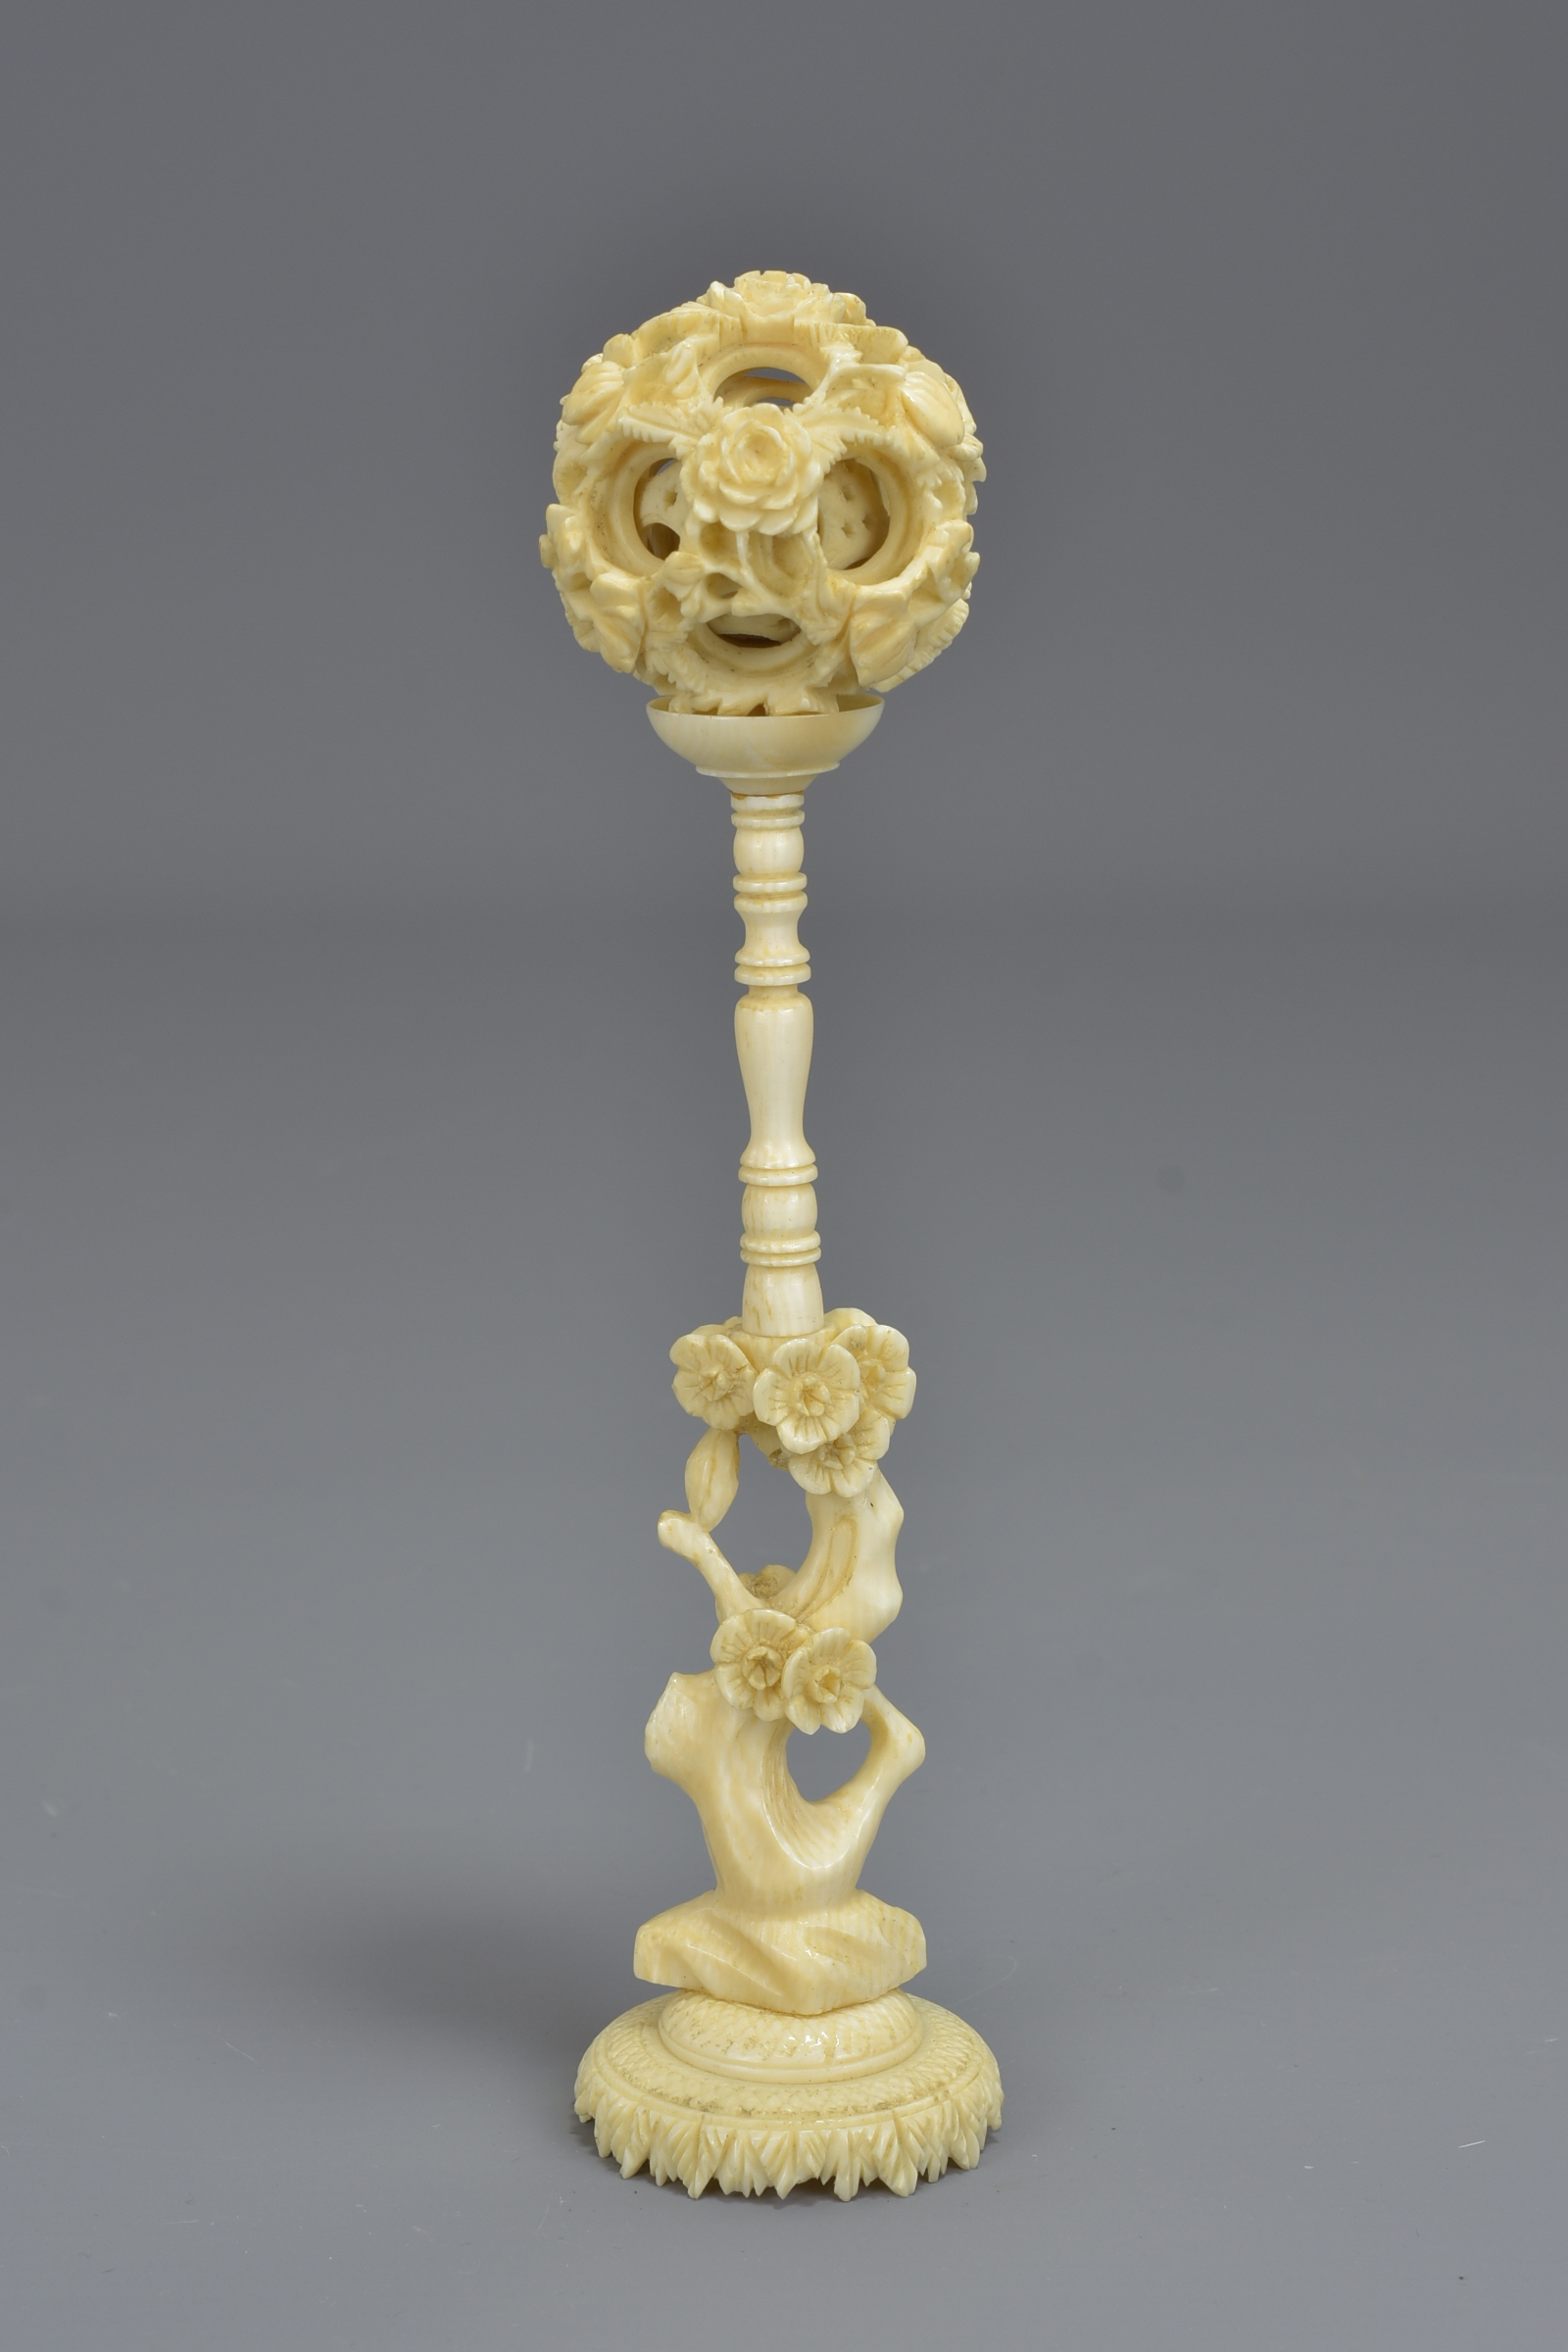 A Chinese 19th century ivory puzzle ball on a carv